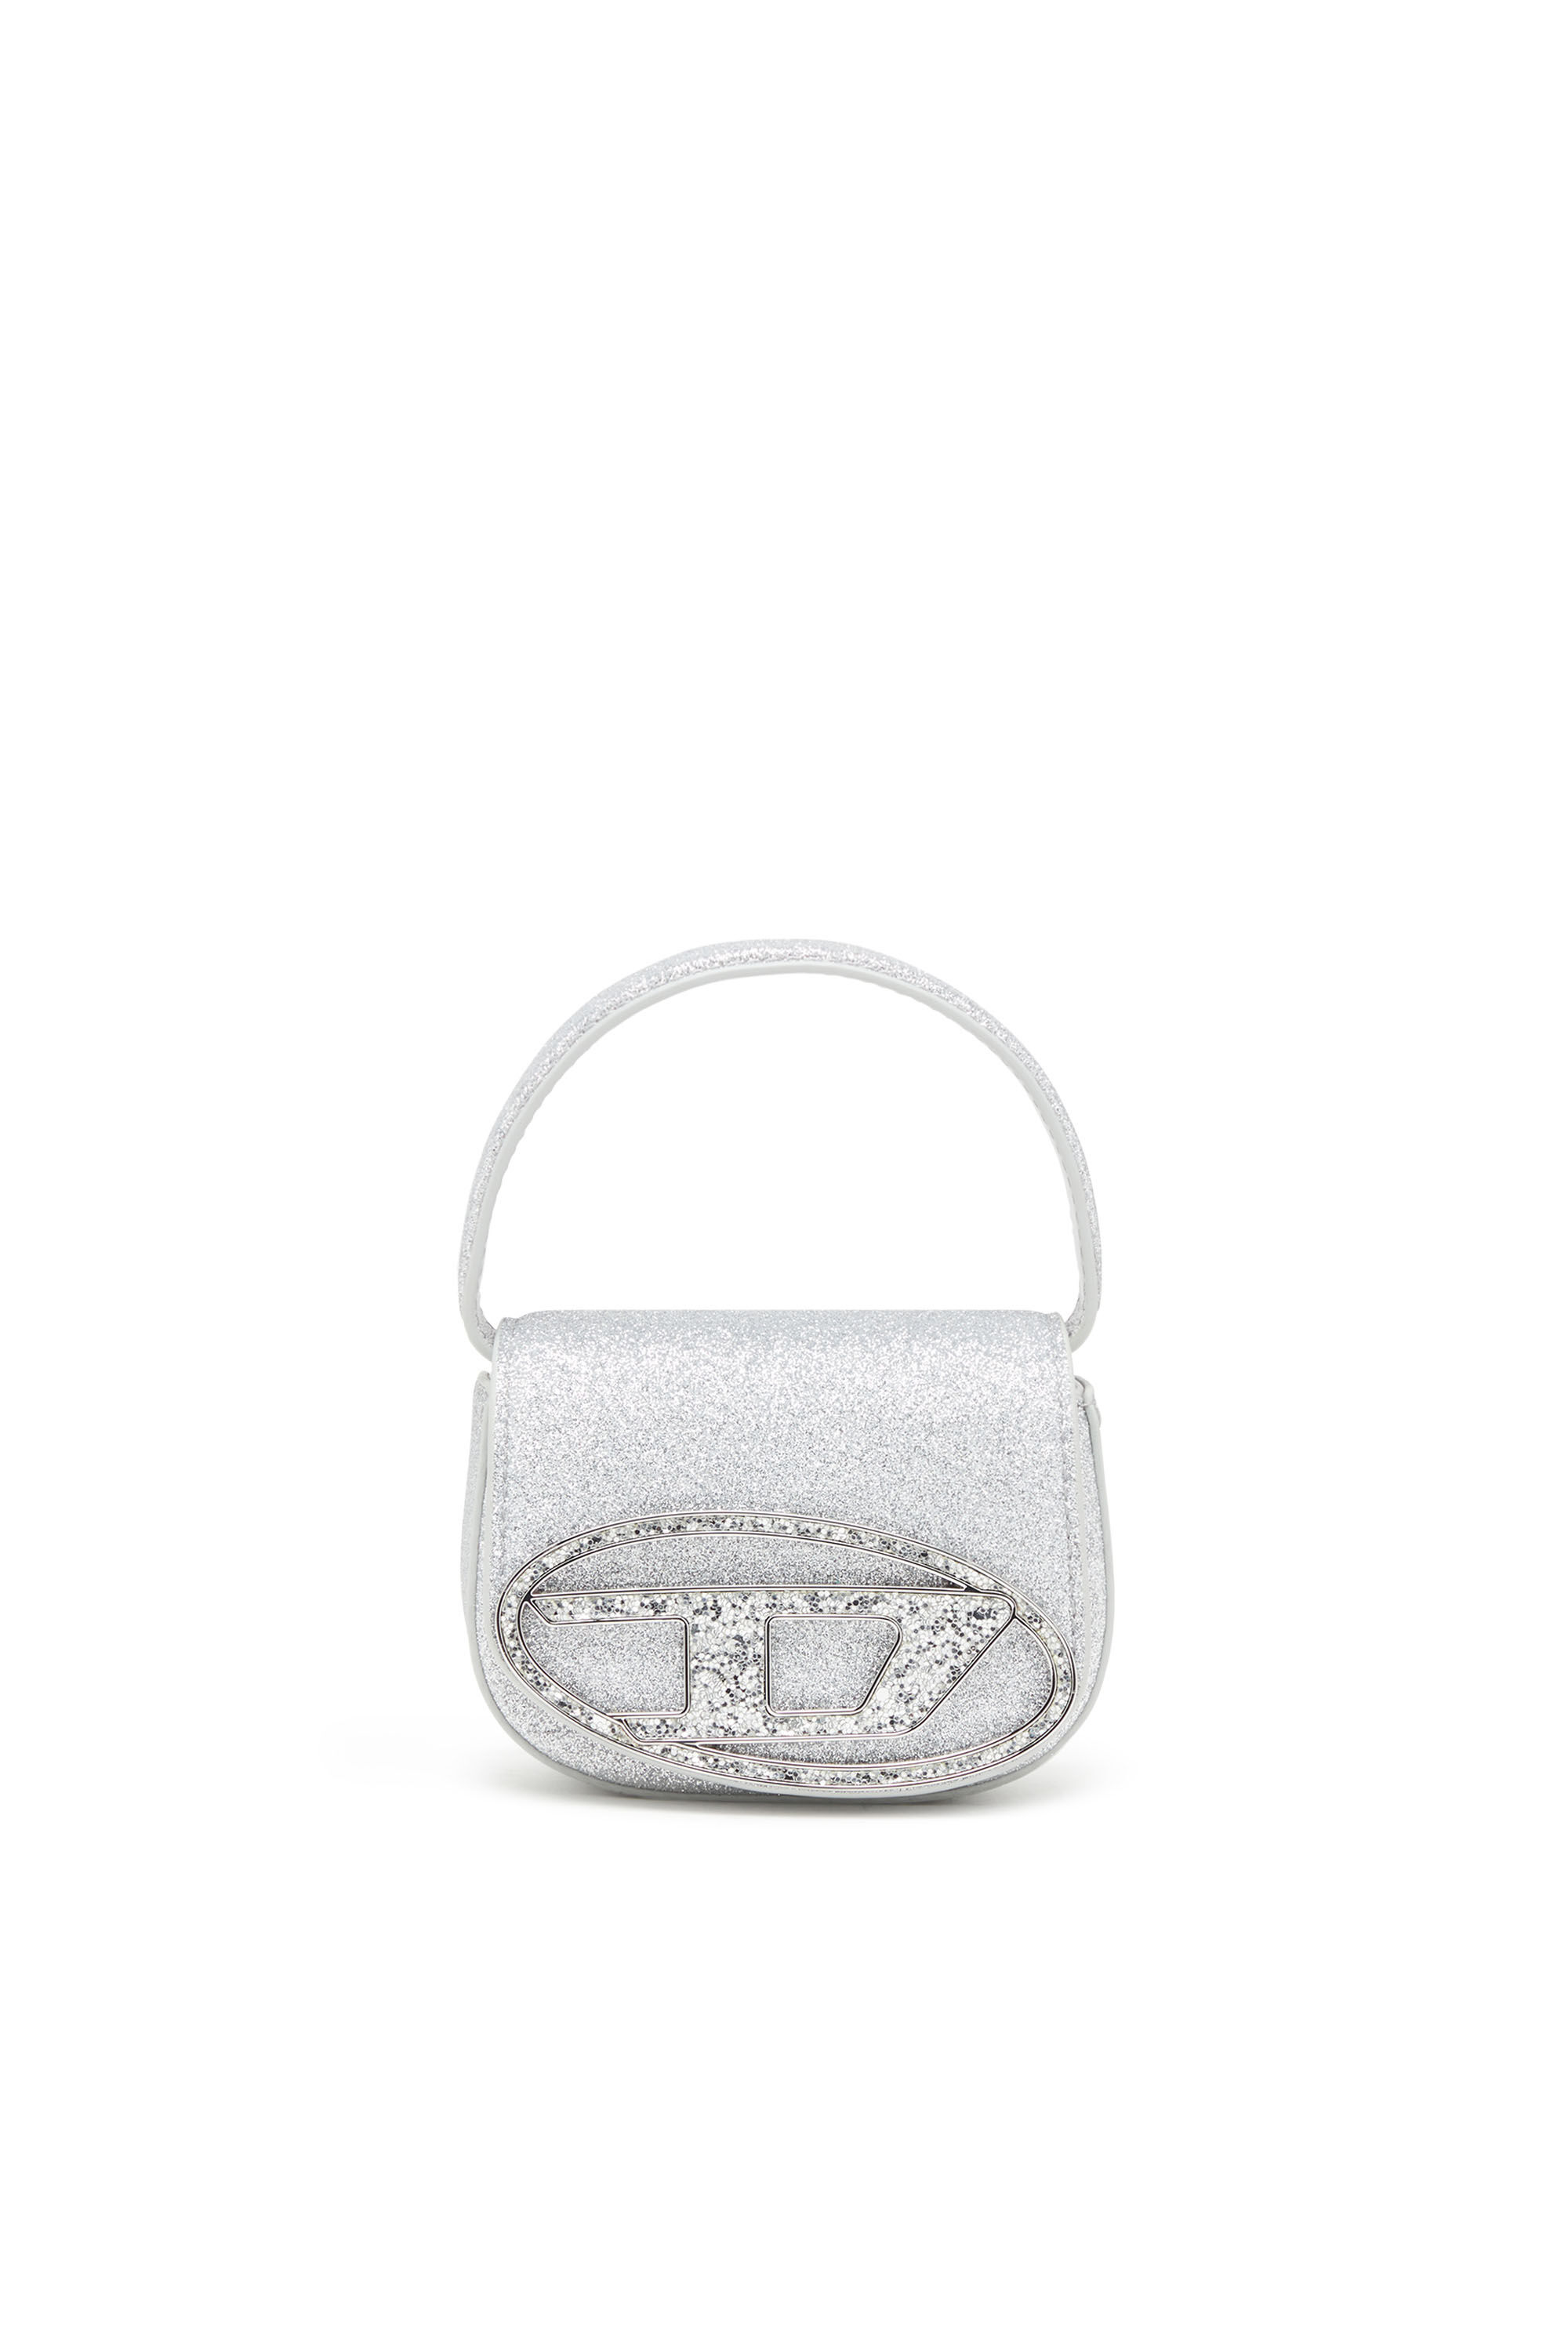 Diesel - 1DR XS, Woman 1DR XS-Iconic mini bag in glitter fabric in Silver - Image 1